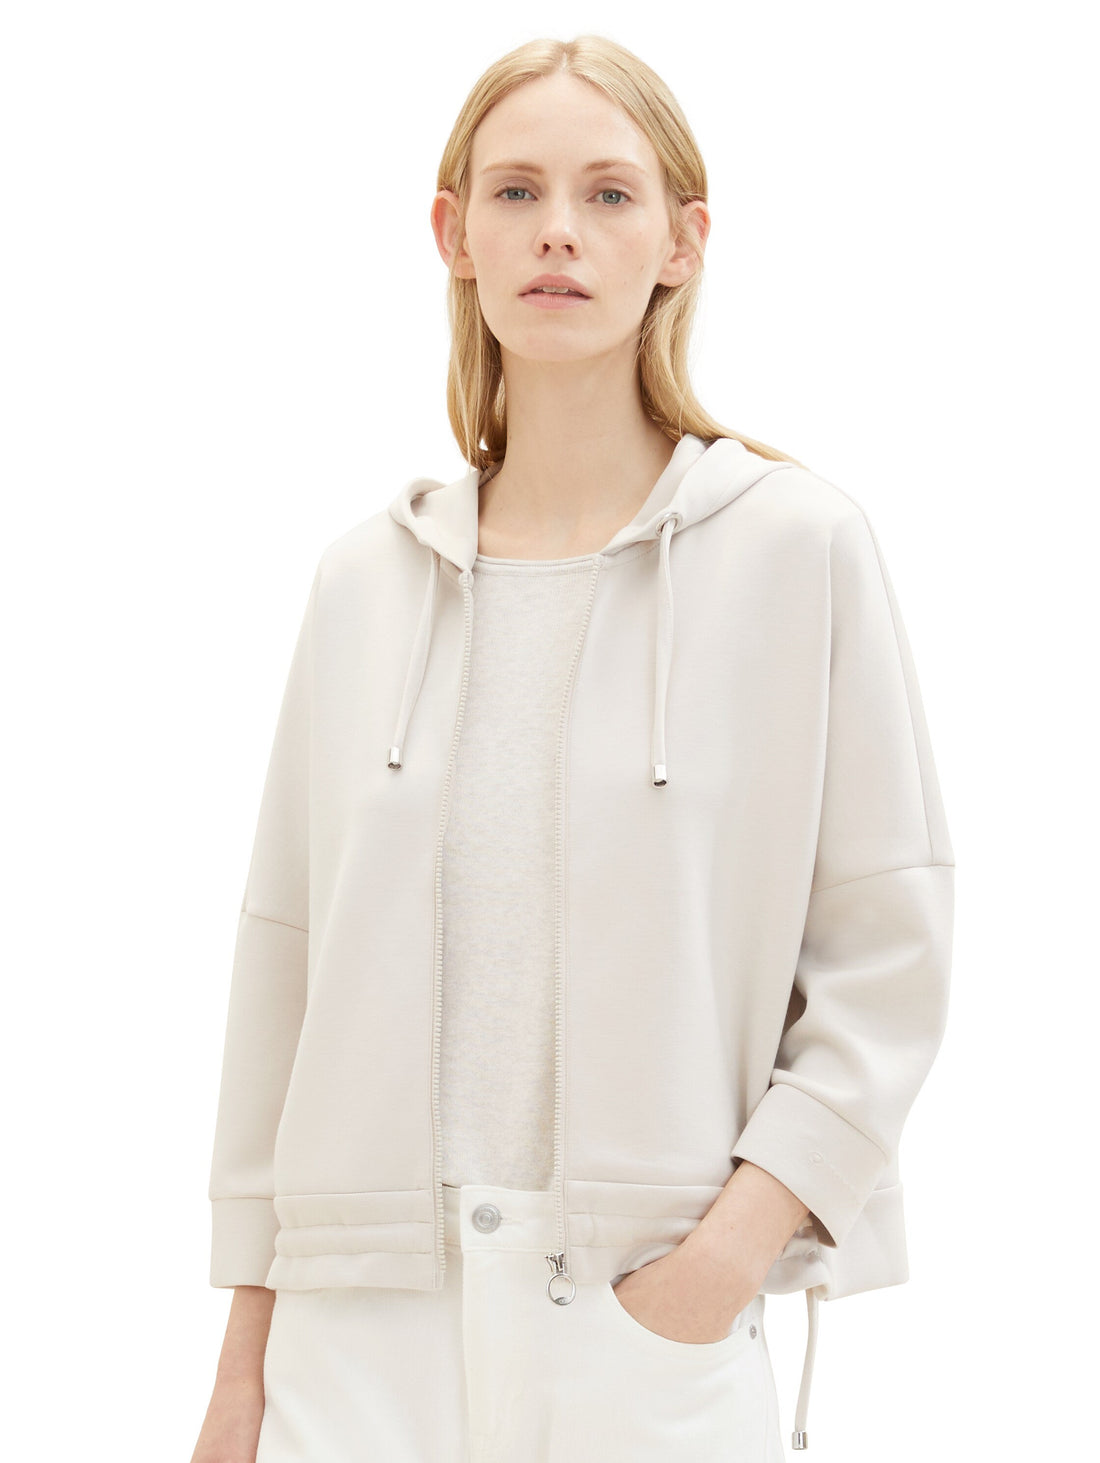 Hoodie With Adjustable Side Strap_1038182_16339_02